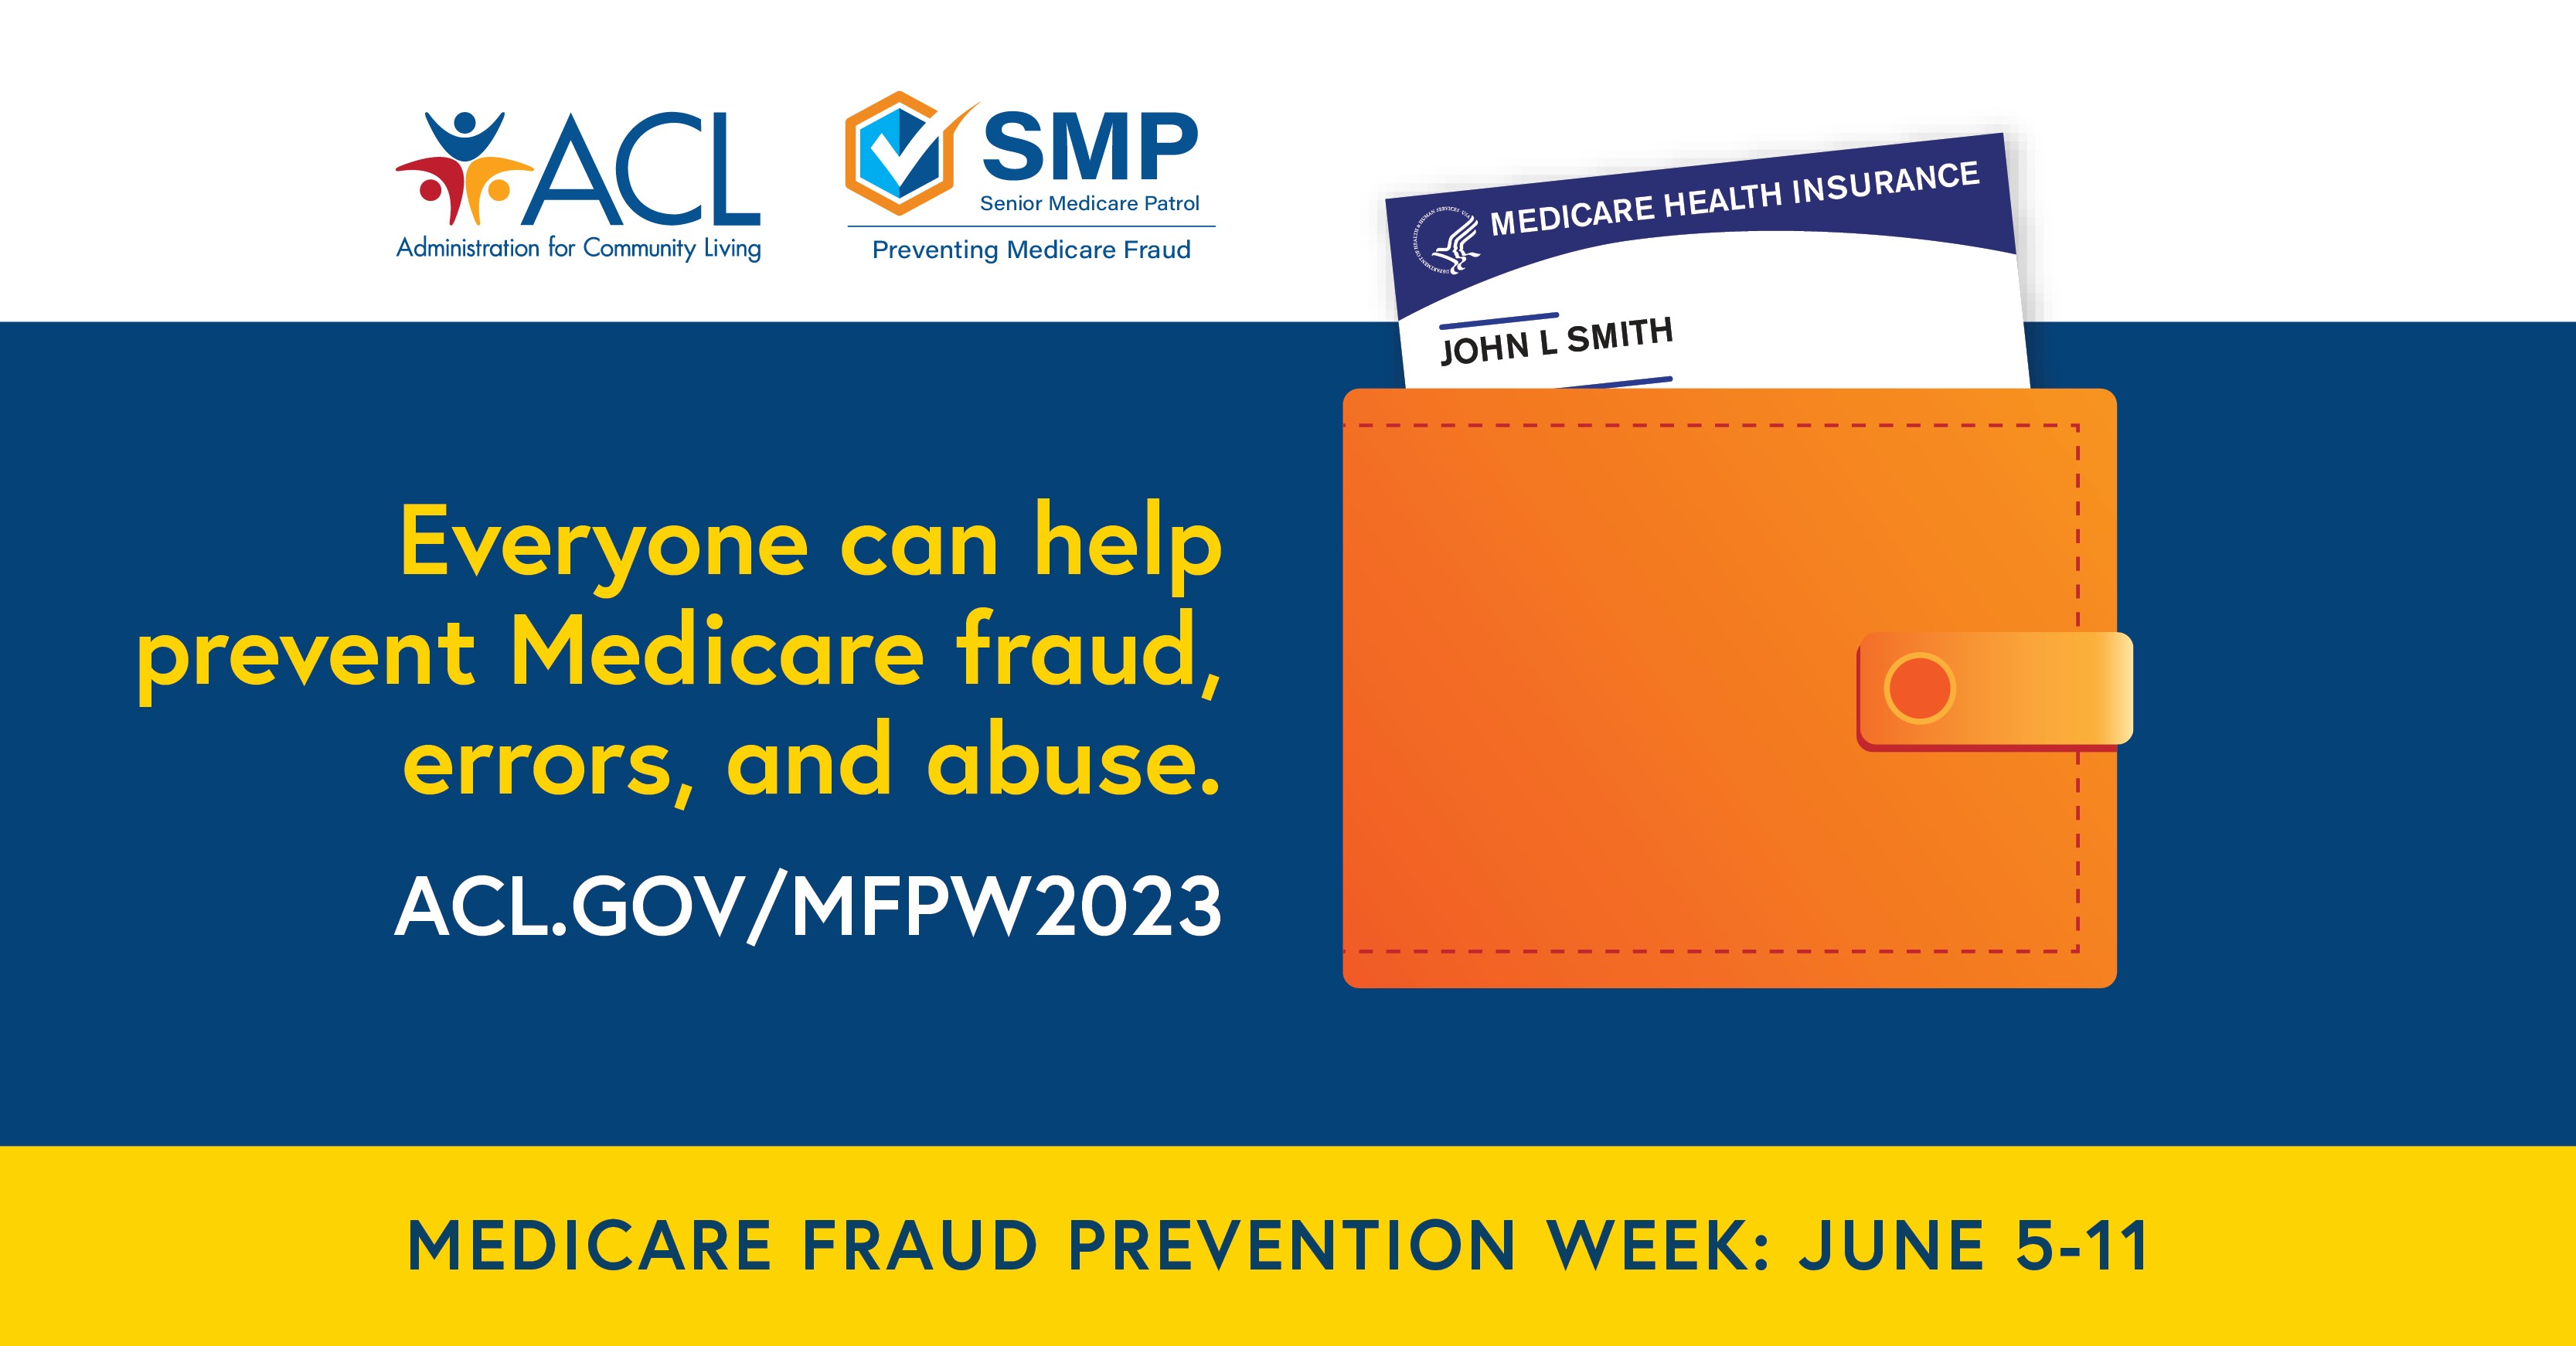 Everyone can help prevent Medicare fraud, errors, and abuse. ACL.gov/MFPW2023. Medicare Fraud Prevention Week: June 5-11. ACL, Administration for Community Living. SMP, Senior Medicare Patrol: Preventing Medicare Fraud.